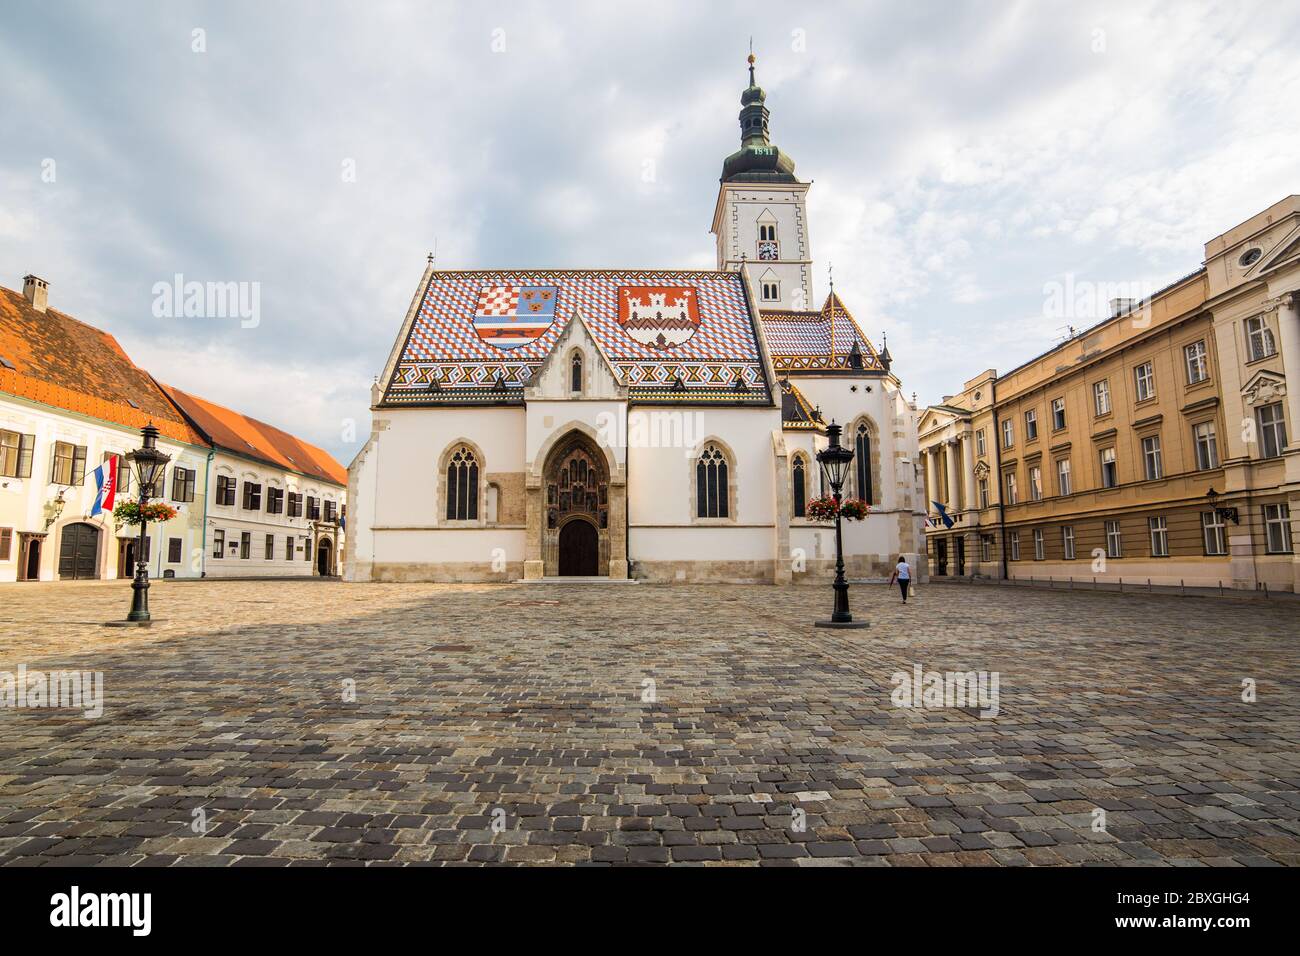 ZAGREB, CROATIA - 17TH AUGUST 2016: The outside of St Marks Church in central Zagreb, Croatia during the day. A person can be seen. Stock Photo